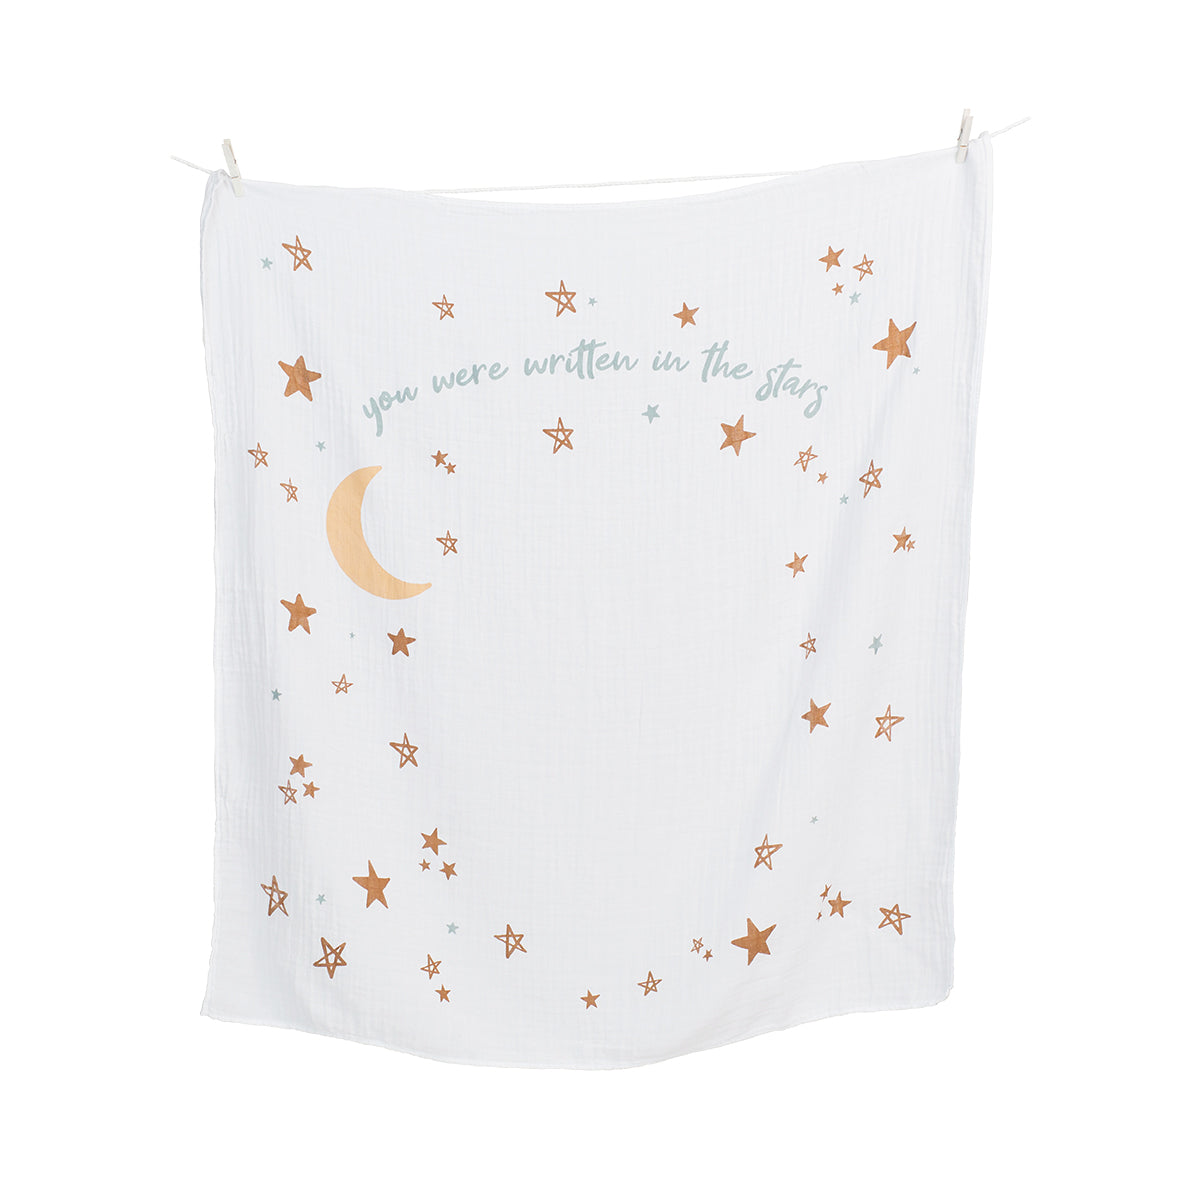 Written in the Stars- Baby’s First Years Blanket & Card Set